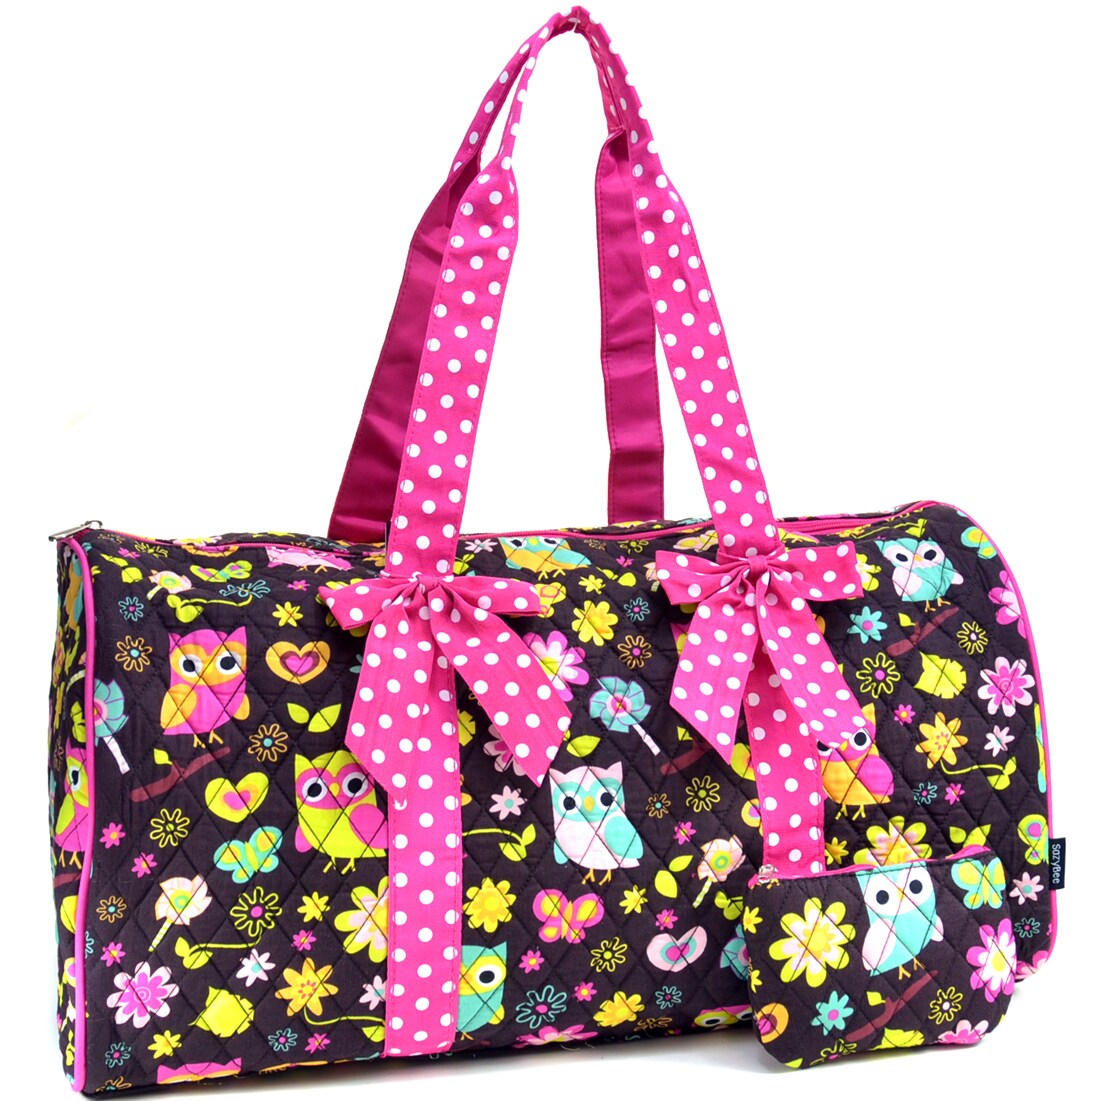 Sazy Bee Designs Owl and Floral Print Quilted Cotton Duffel Bag